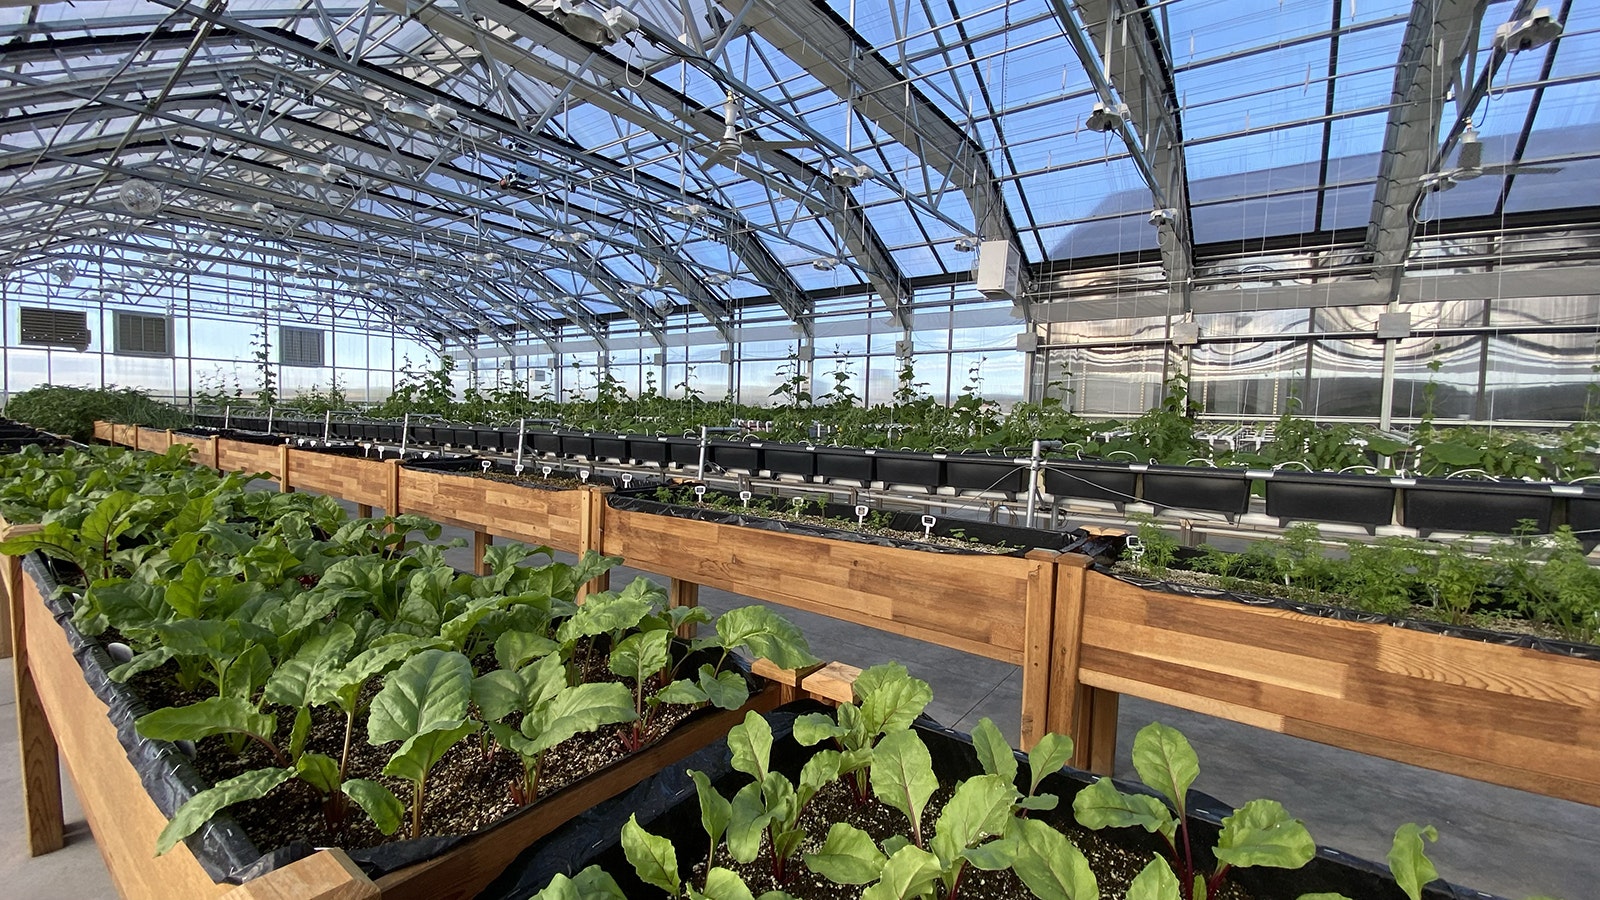 The Satchitanada Ranch in Sublette County produces a range of greens and herbs including two different kinds of basil.